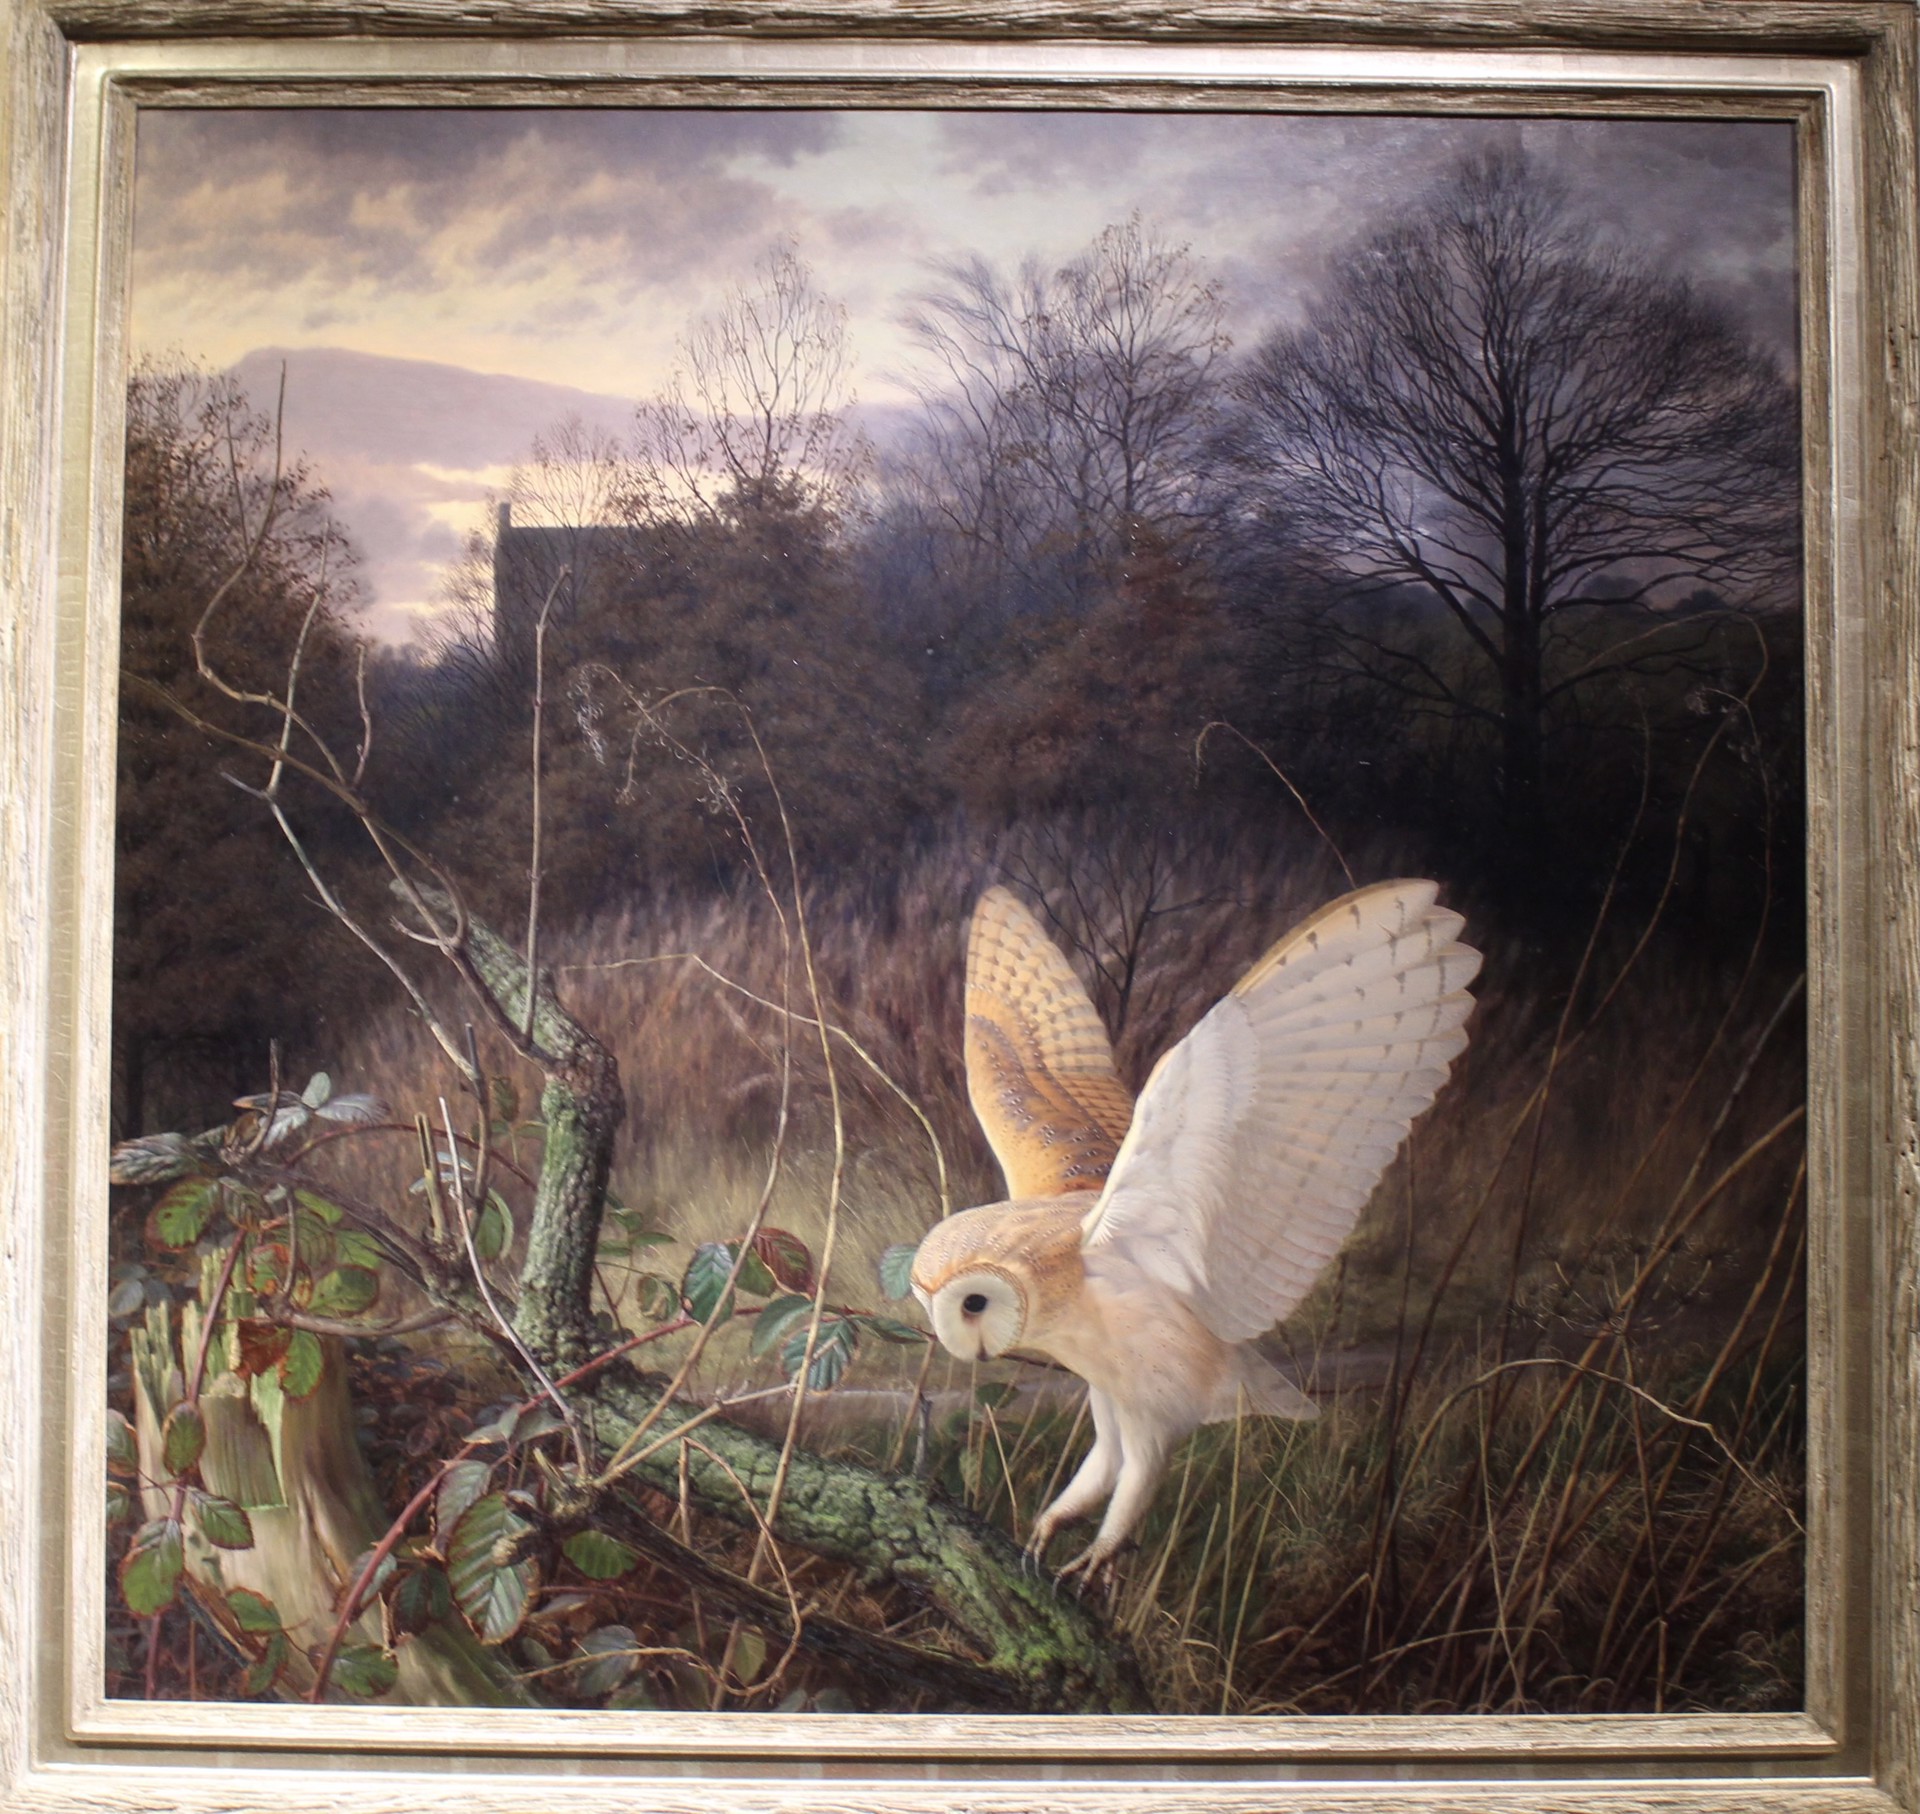 BARN OWL ON A WINTER EVENING by Raymond Booth